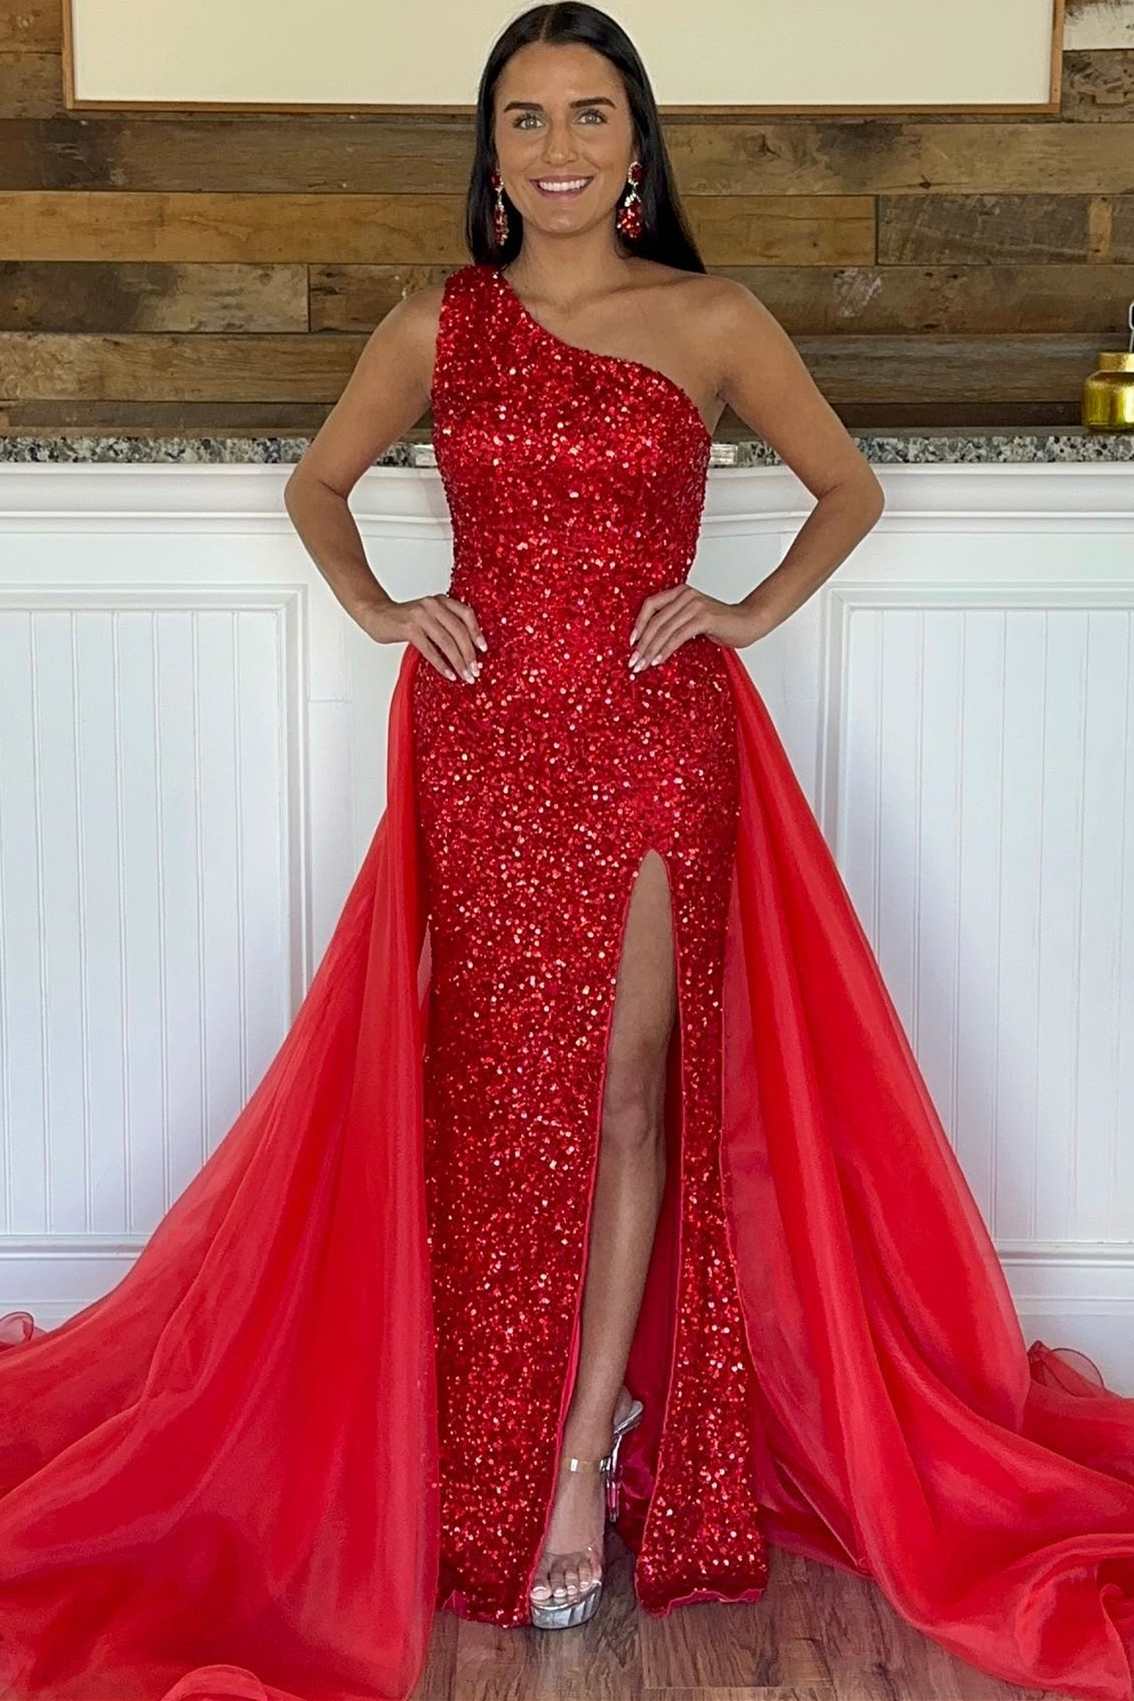 Stunning Red Prom Dress Couture Corset Ball Gown with Long Train for  Photoshooting Strapless Sweetheart Evening Gown Customize